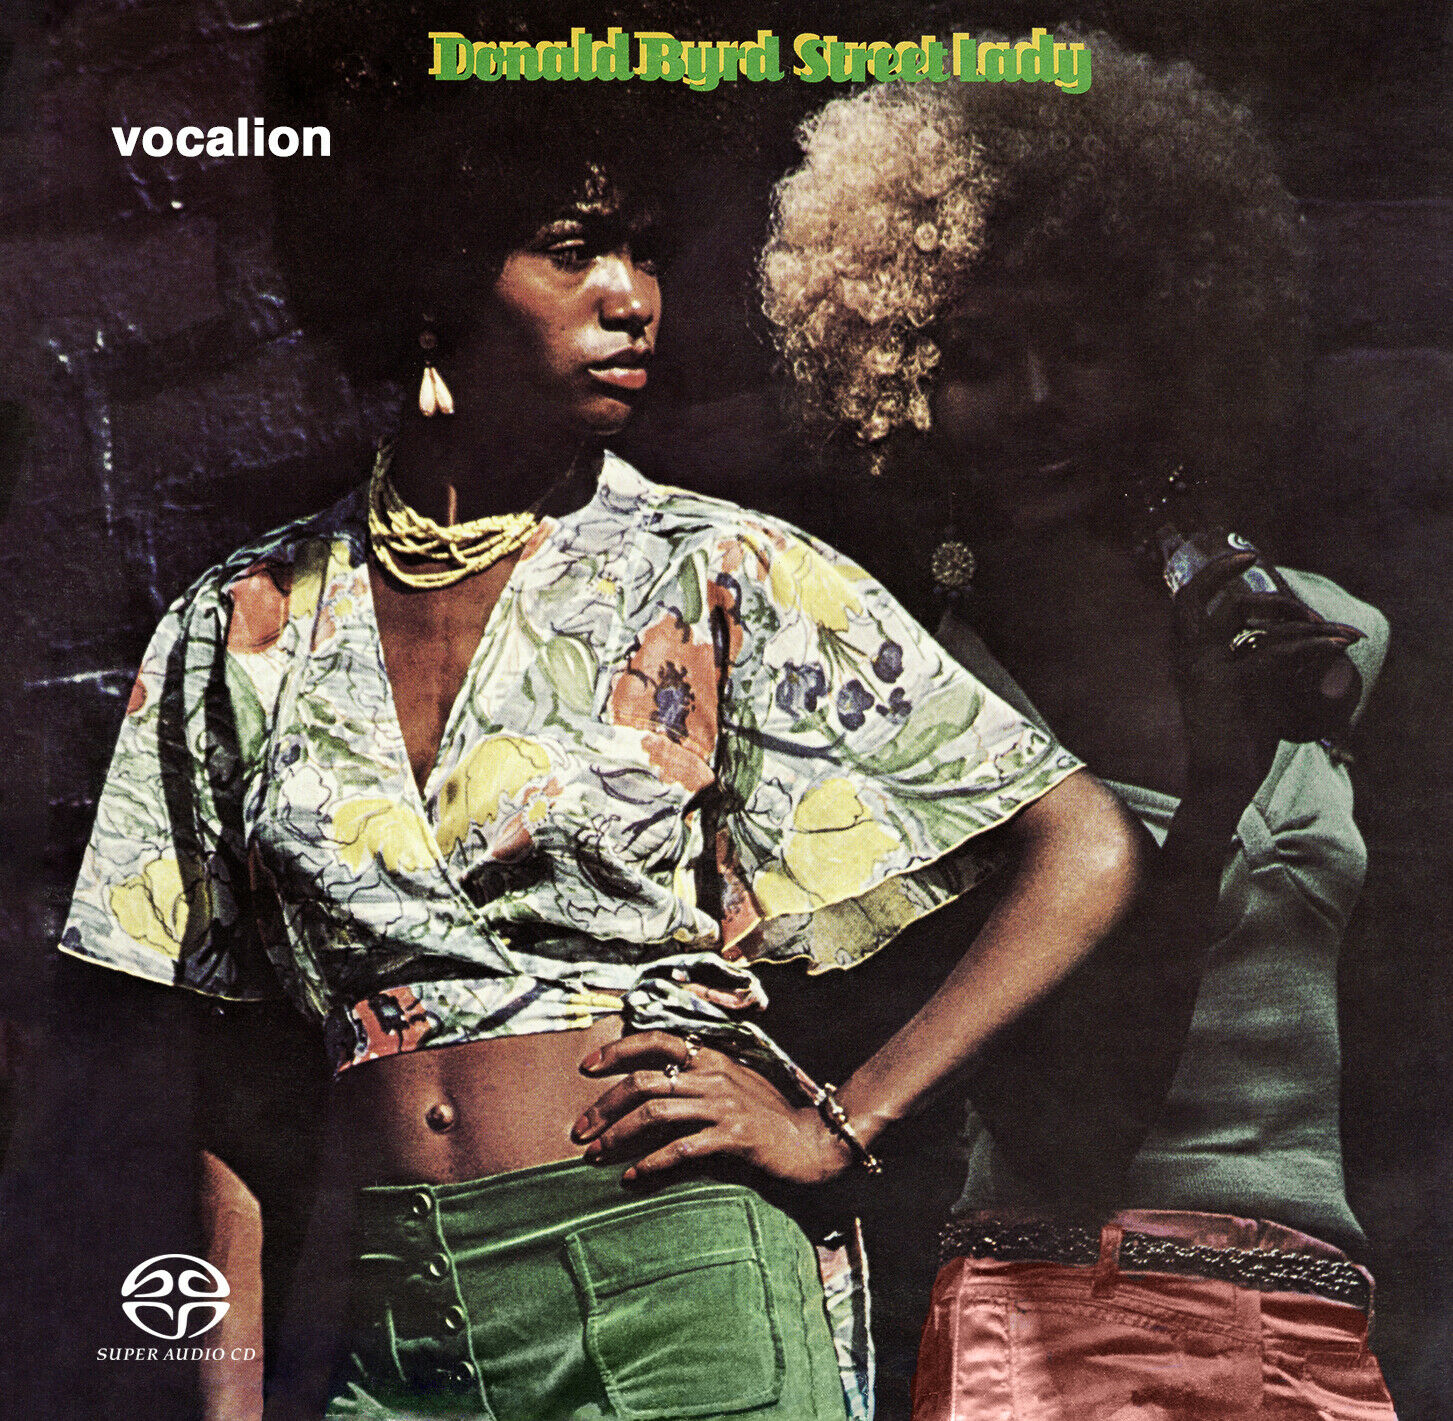 Donald Byrd - Street Lady (1973) [Reissue 2020] MCH SACD ISO + DSF DSD64 + Hi-Res FLAC